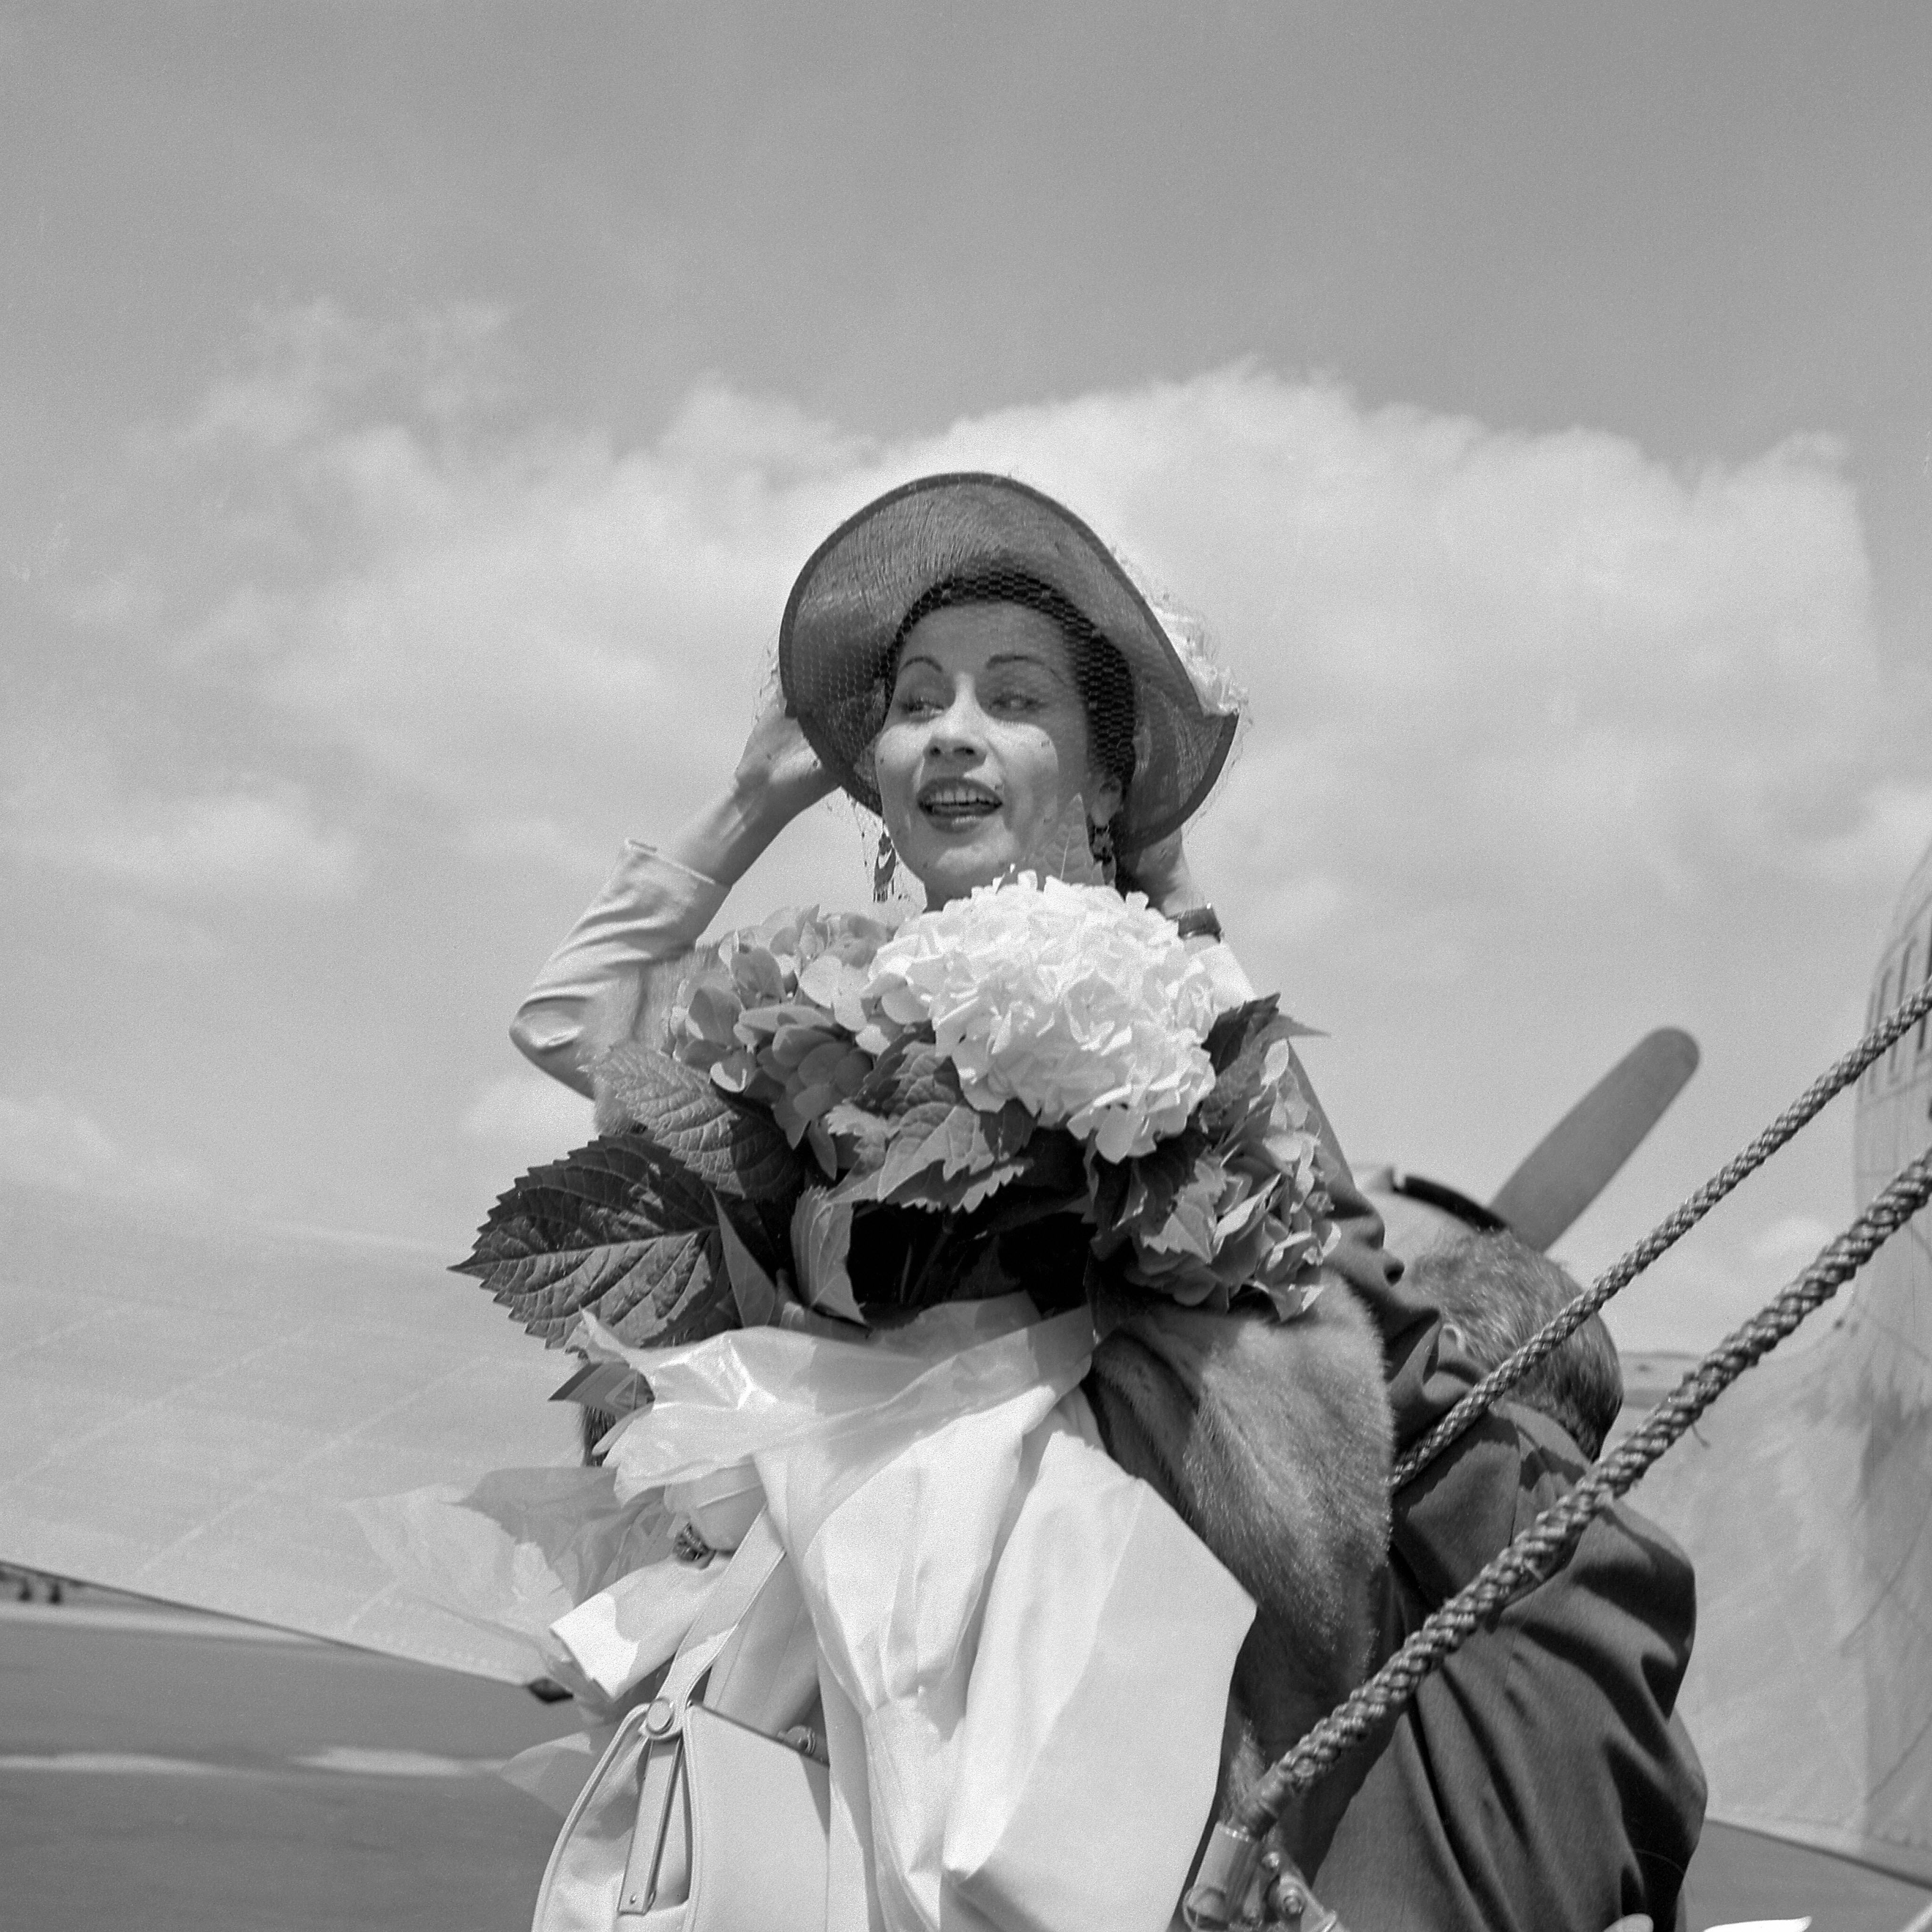 This file photo shows Peruvian soprano Yma Sumac arrives at Le Bourget airport near Paris on June 23, 1952. (Getty)